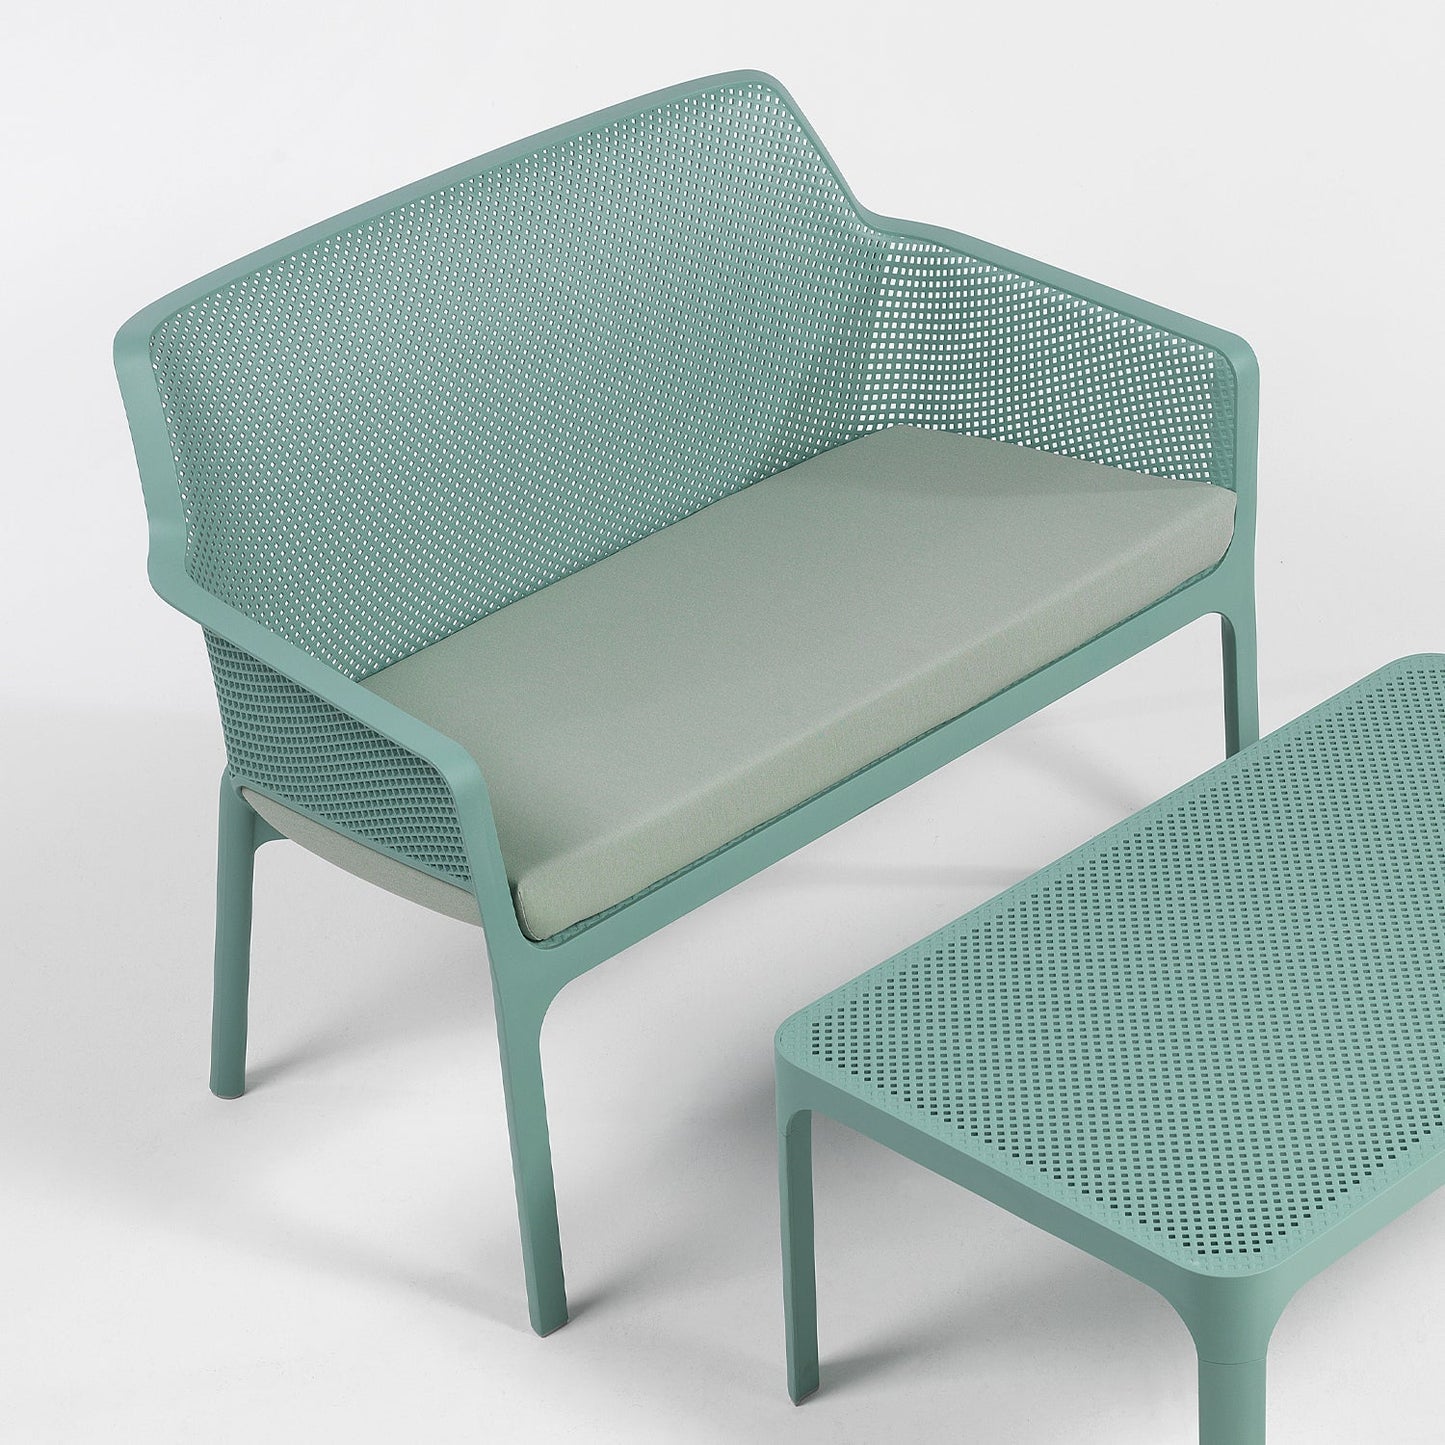 Net Garden Bench In Turquoise With Verde Cushion